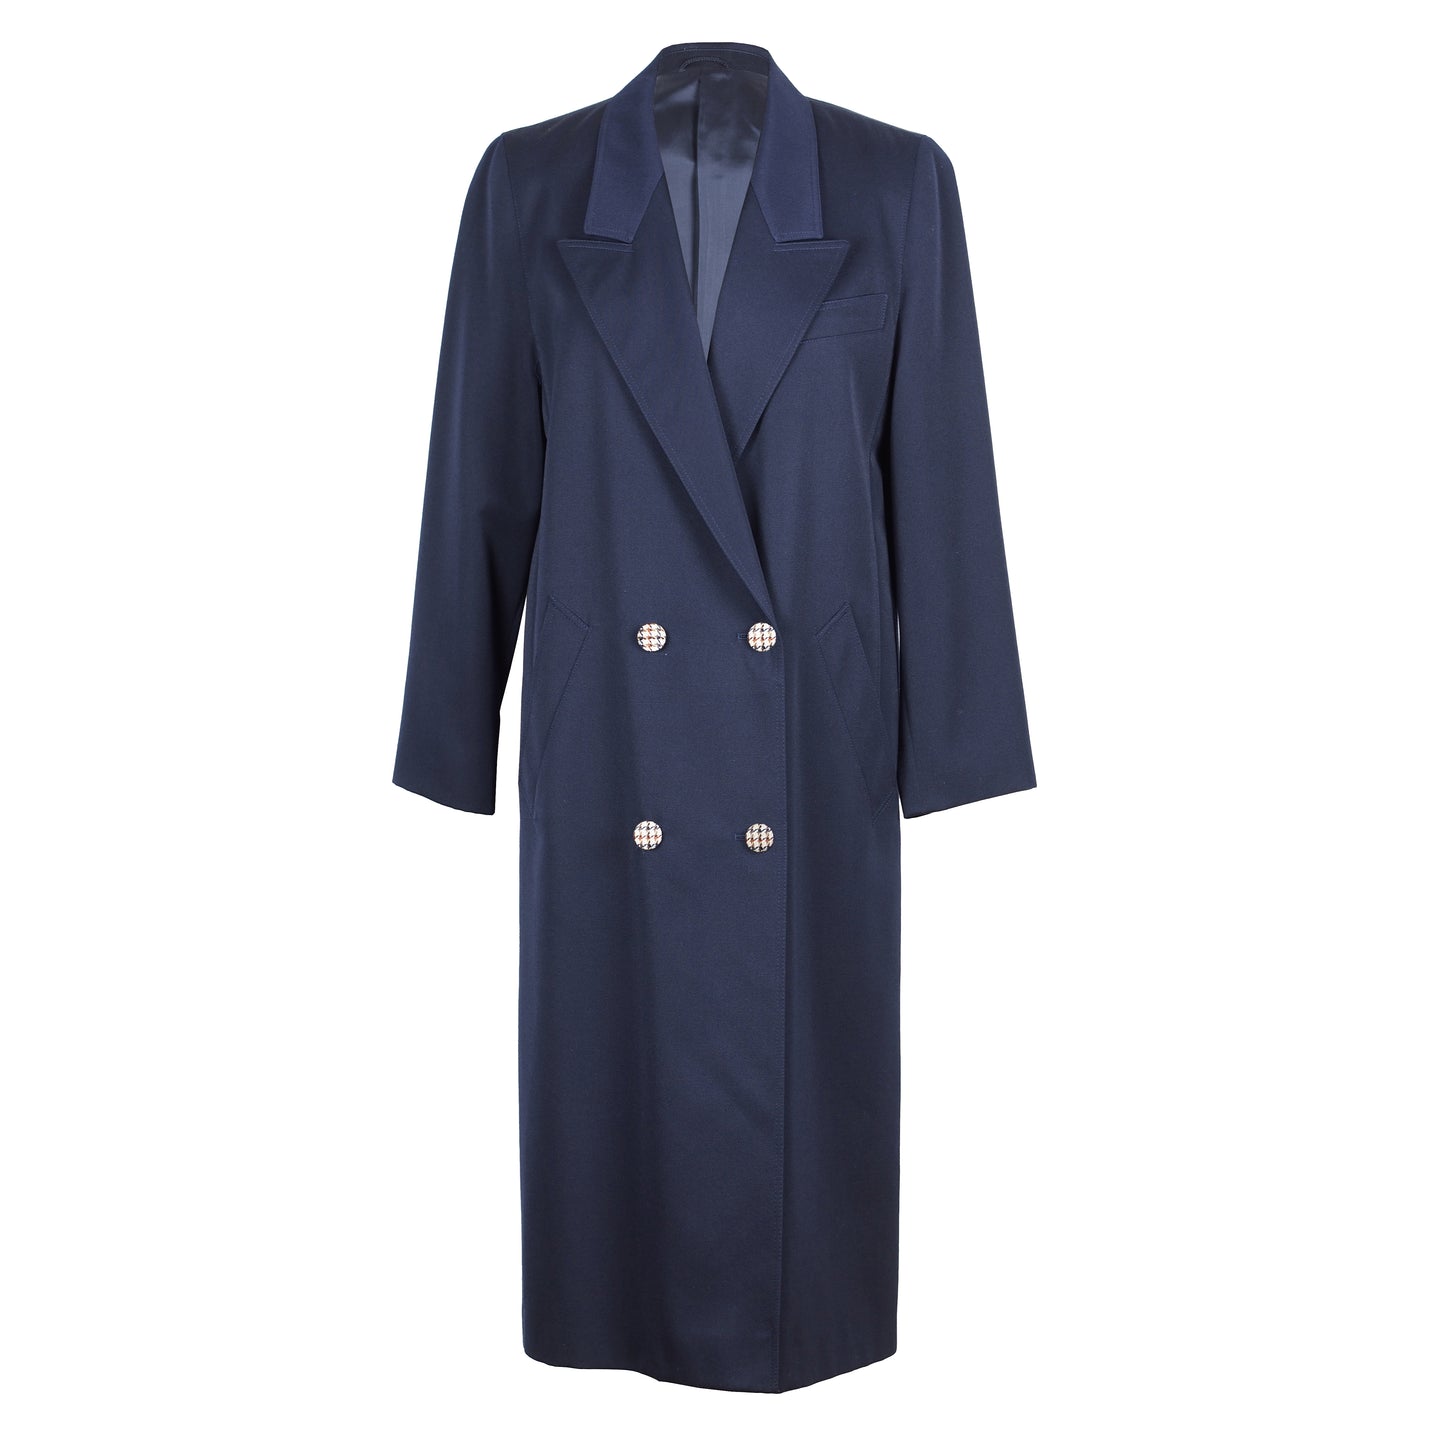 DOUBLE BREASTED TRENCH COAT